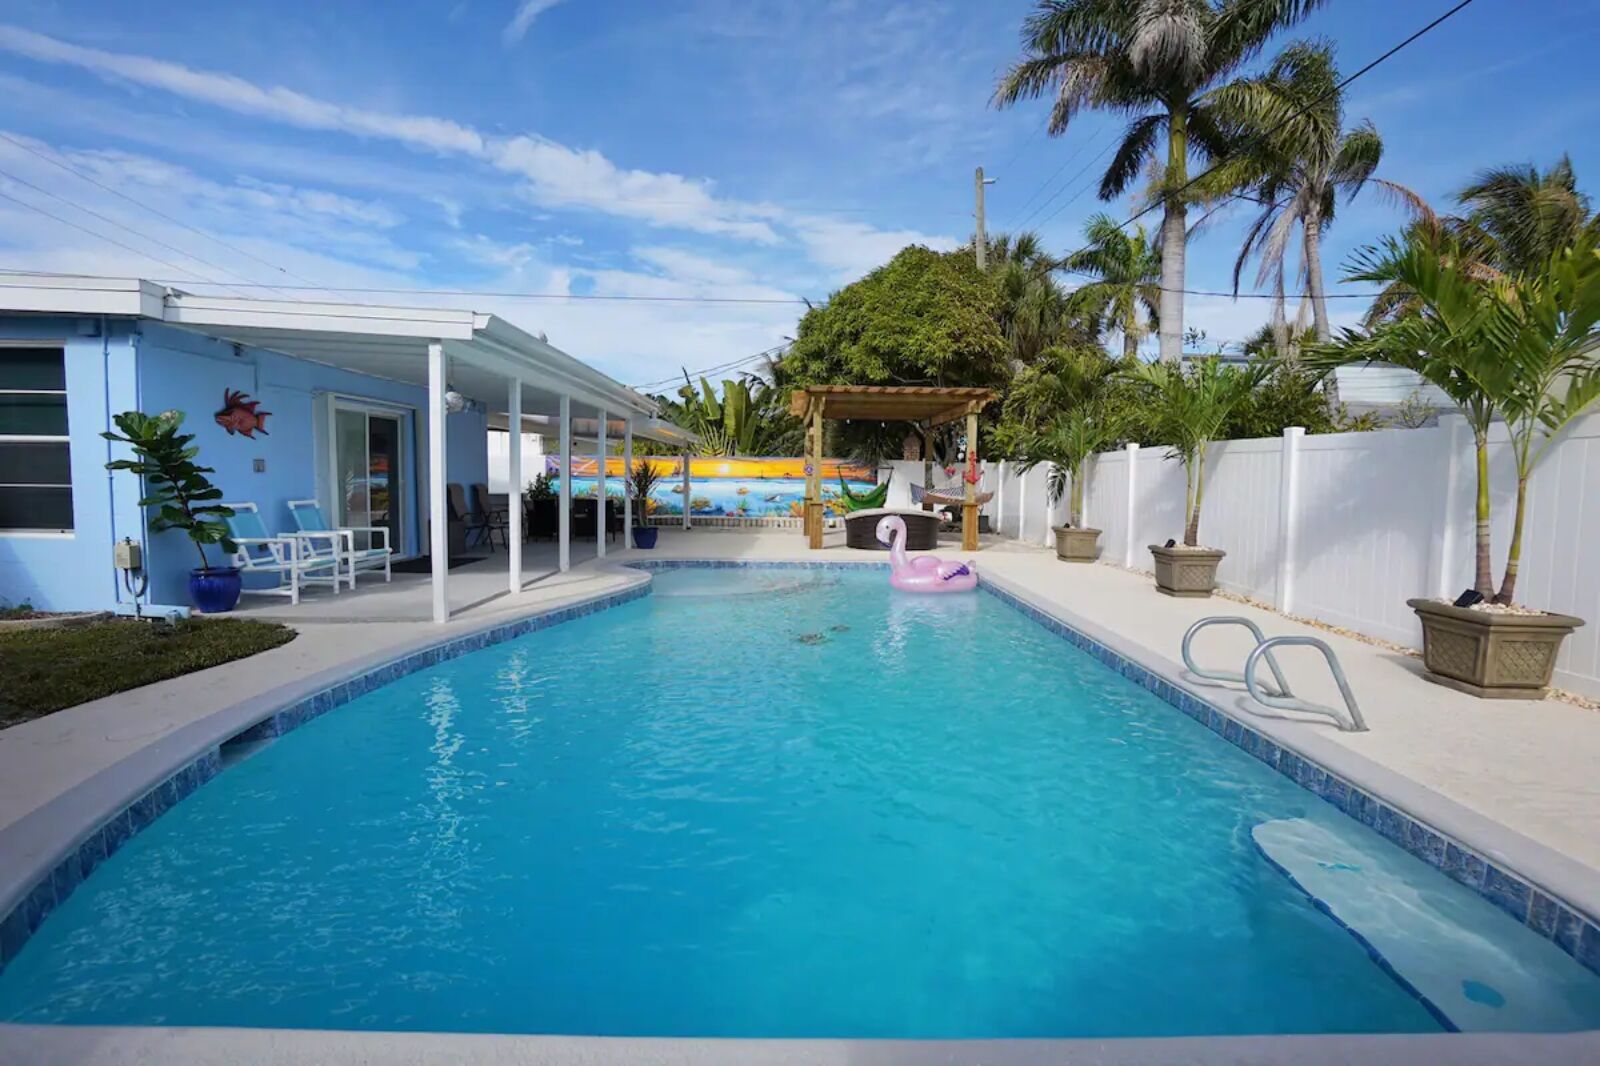 Swimming pool at Airbnb Cocoa Beach rental